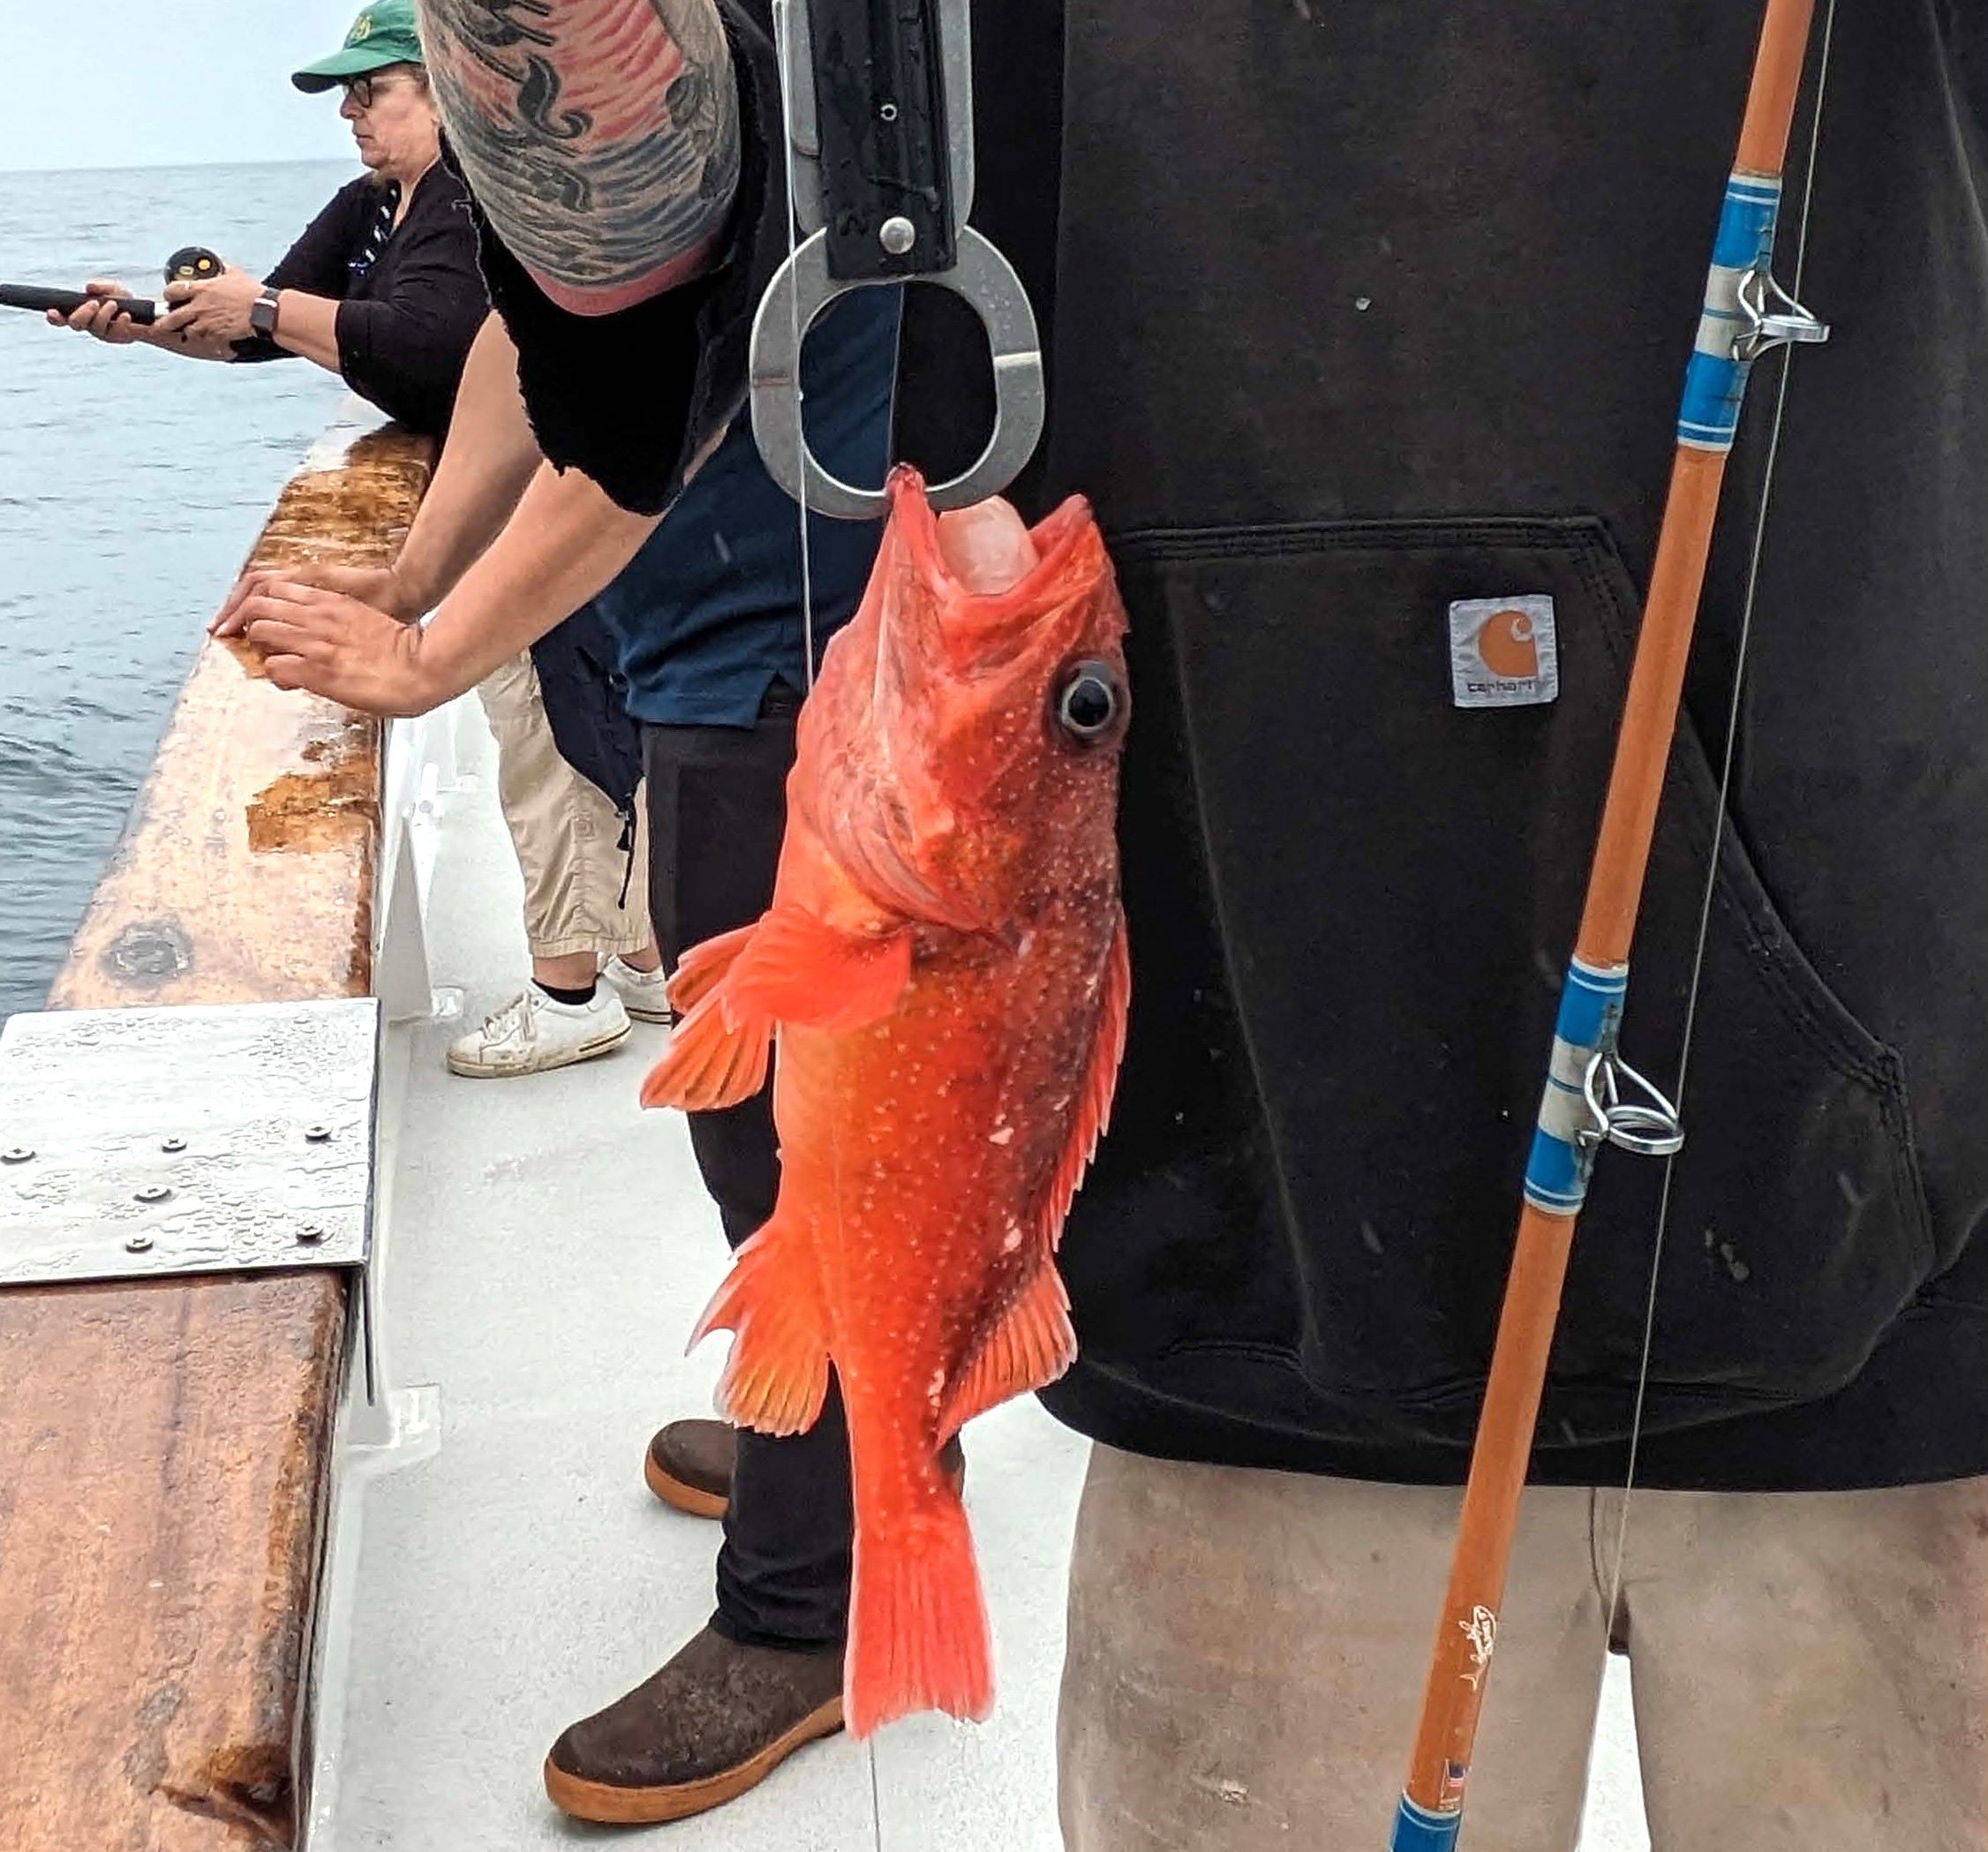 Starry rockfish being released with a descending device from a boat